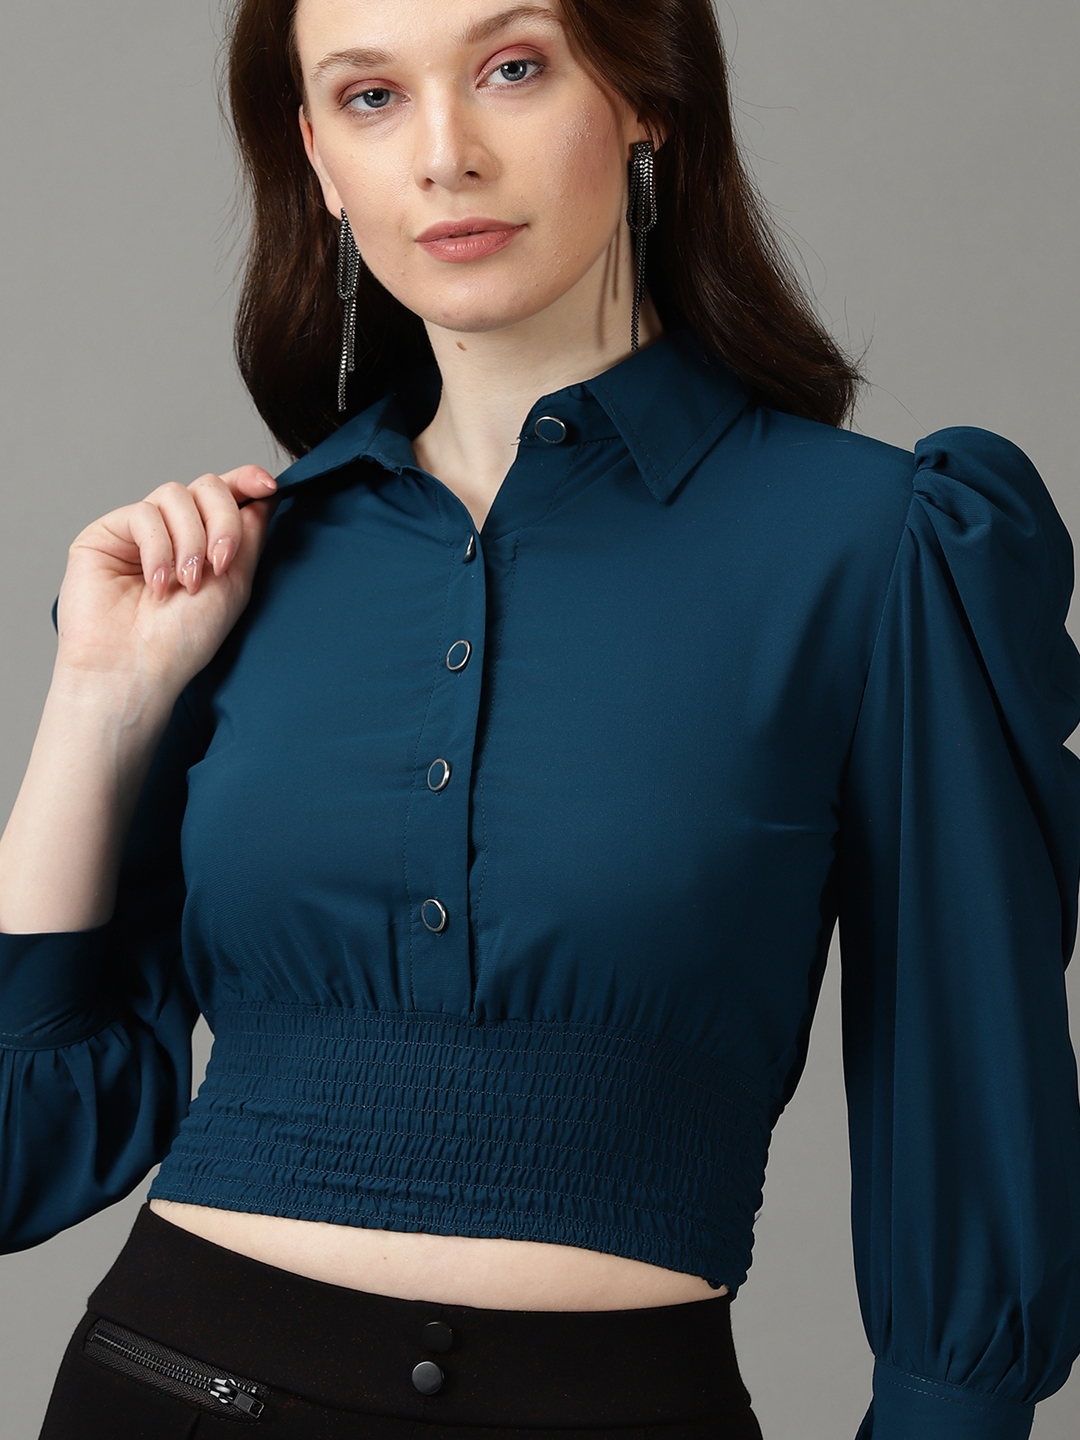 SHOWOFF Women's Shirt Collar Solid Crop Teal Shirt Style Tops